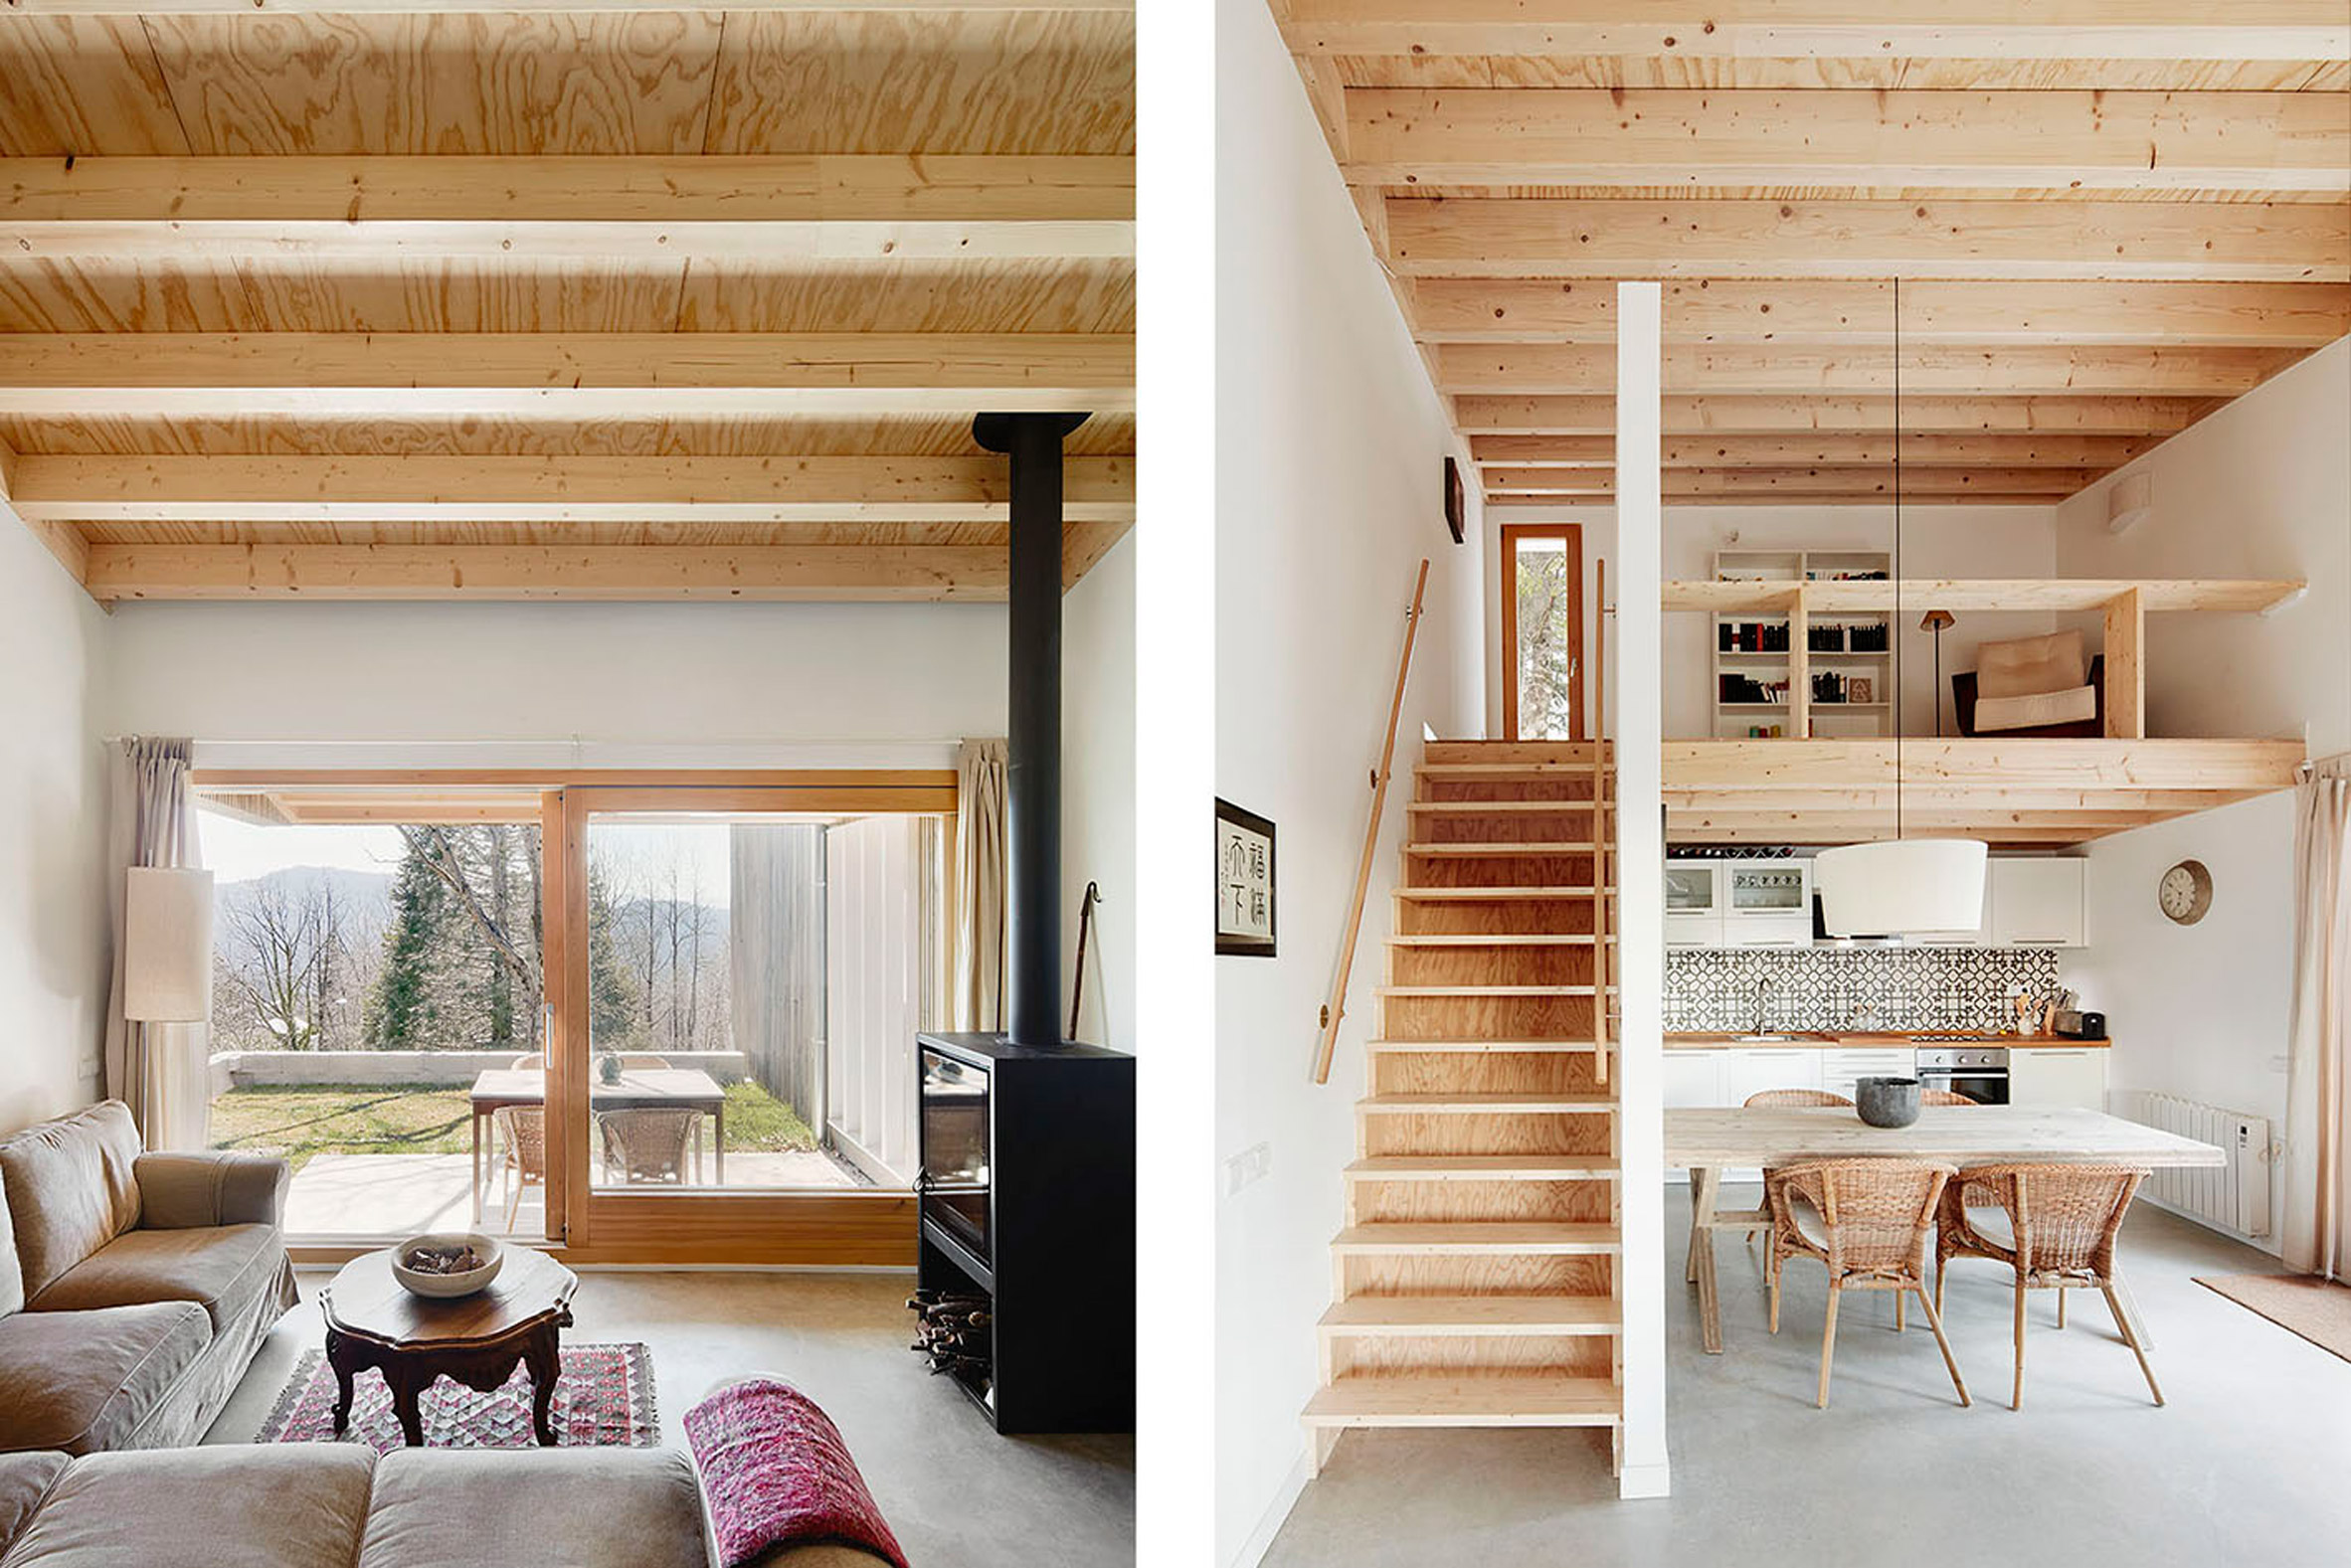 The interiors are cozy, inviting and full of light and warm woods, what can be better for a summer house